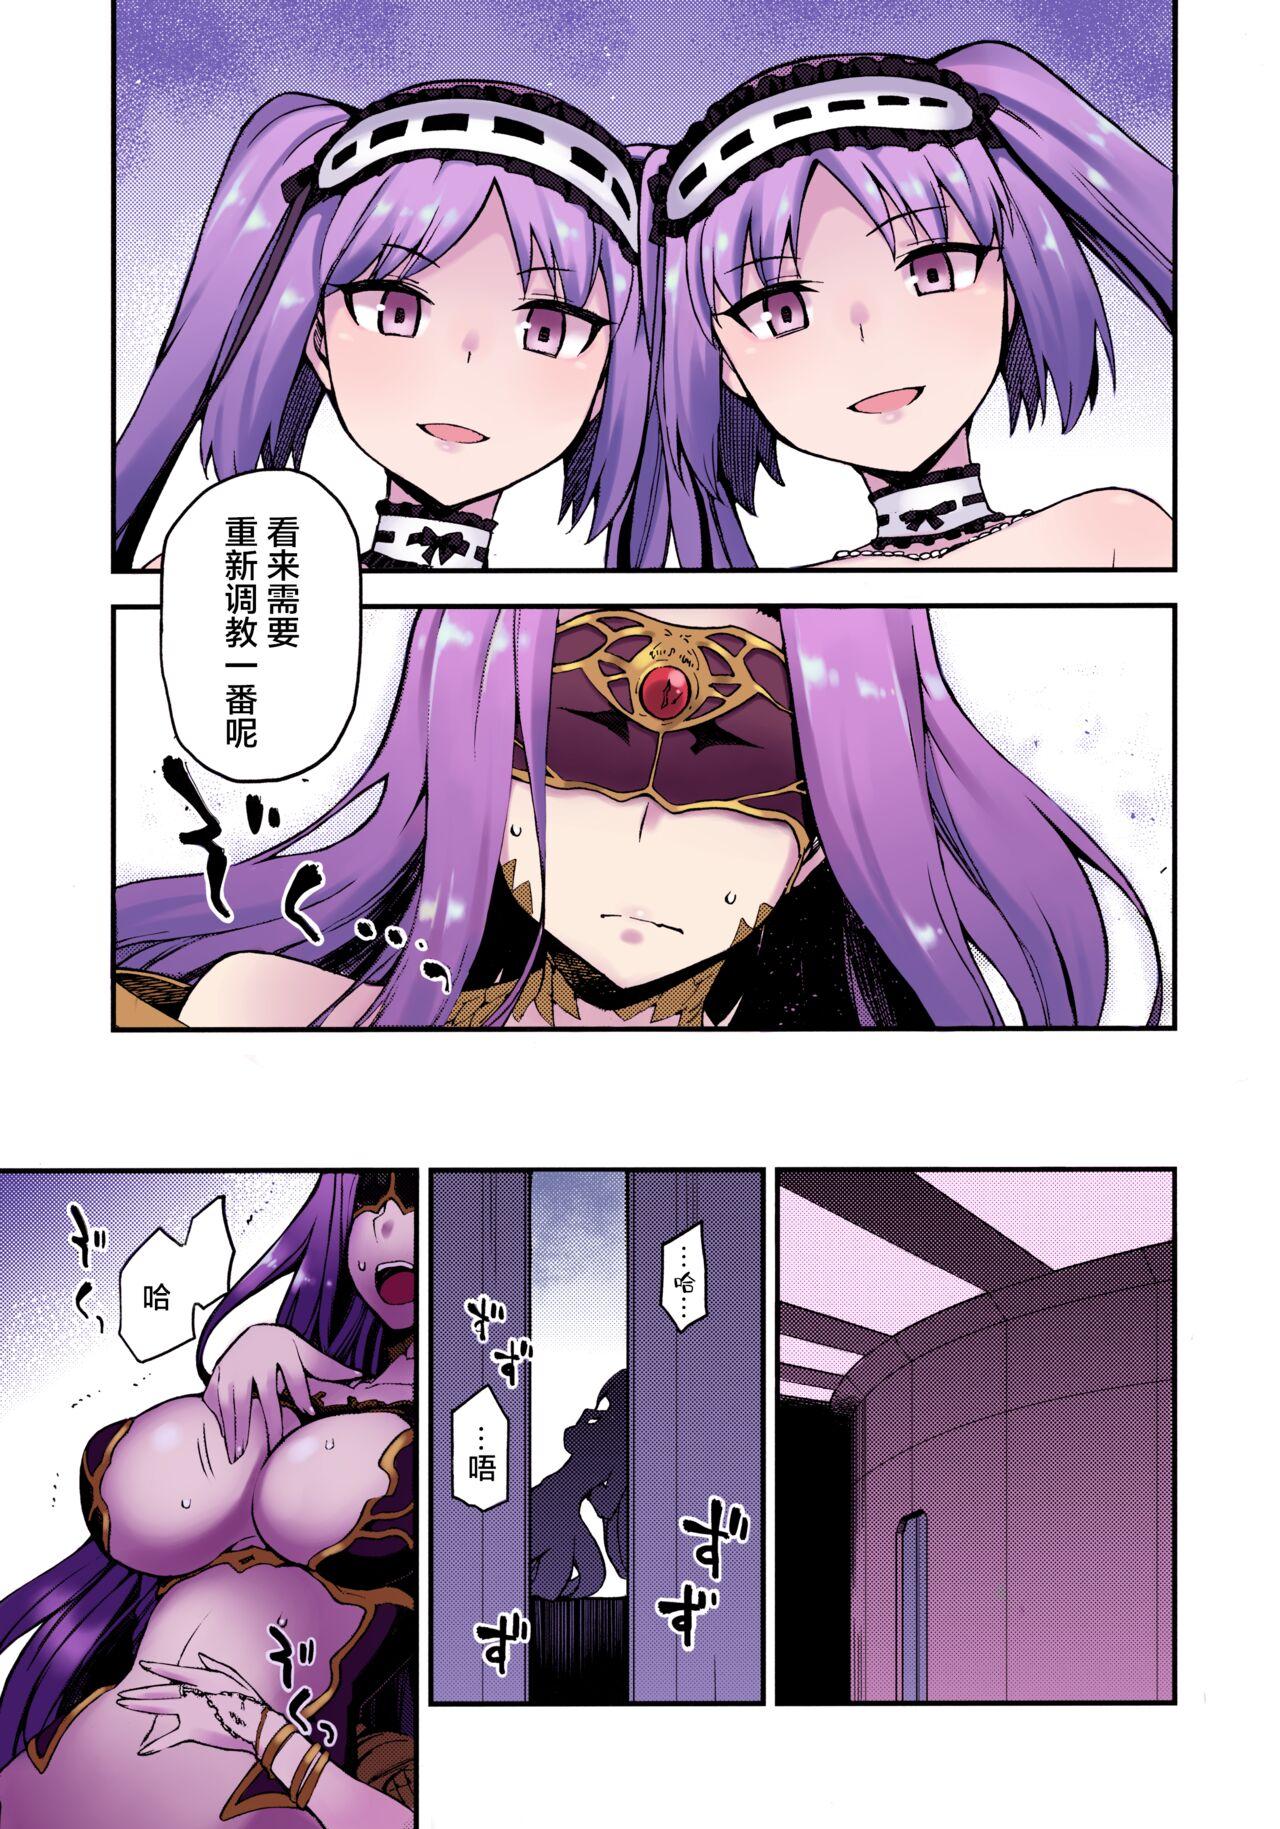 Furry Hebigami no Honnou - Fate grand order Mulher - Page 4